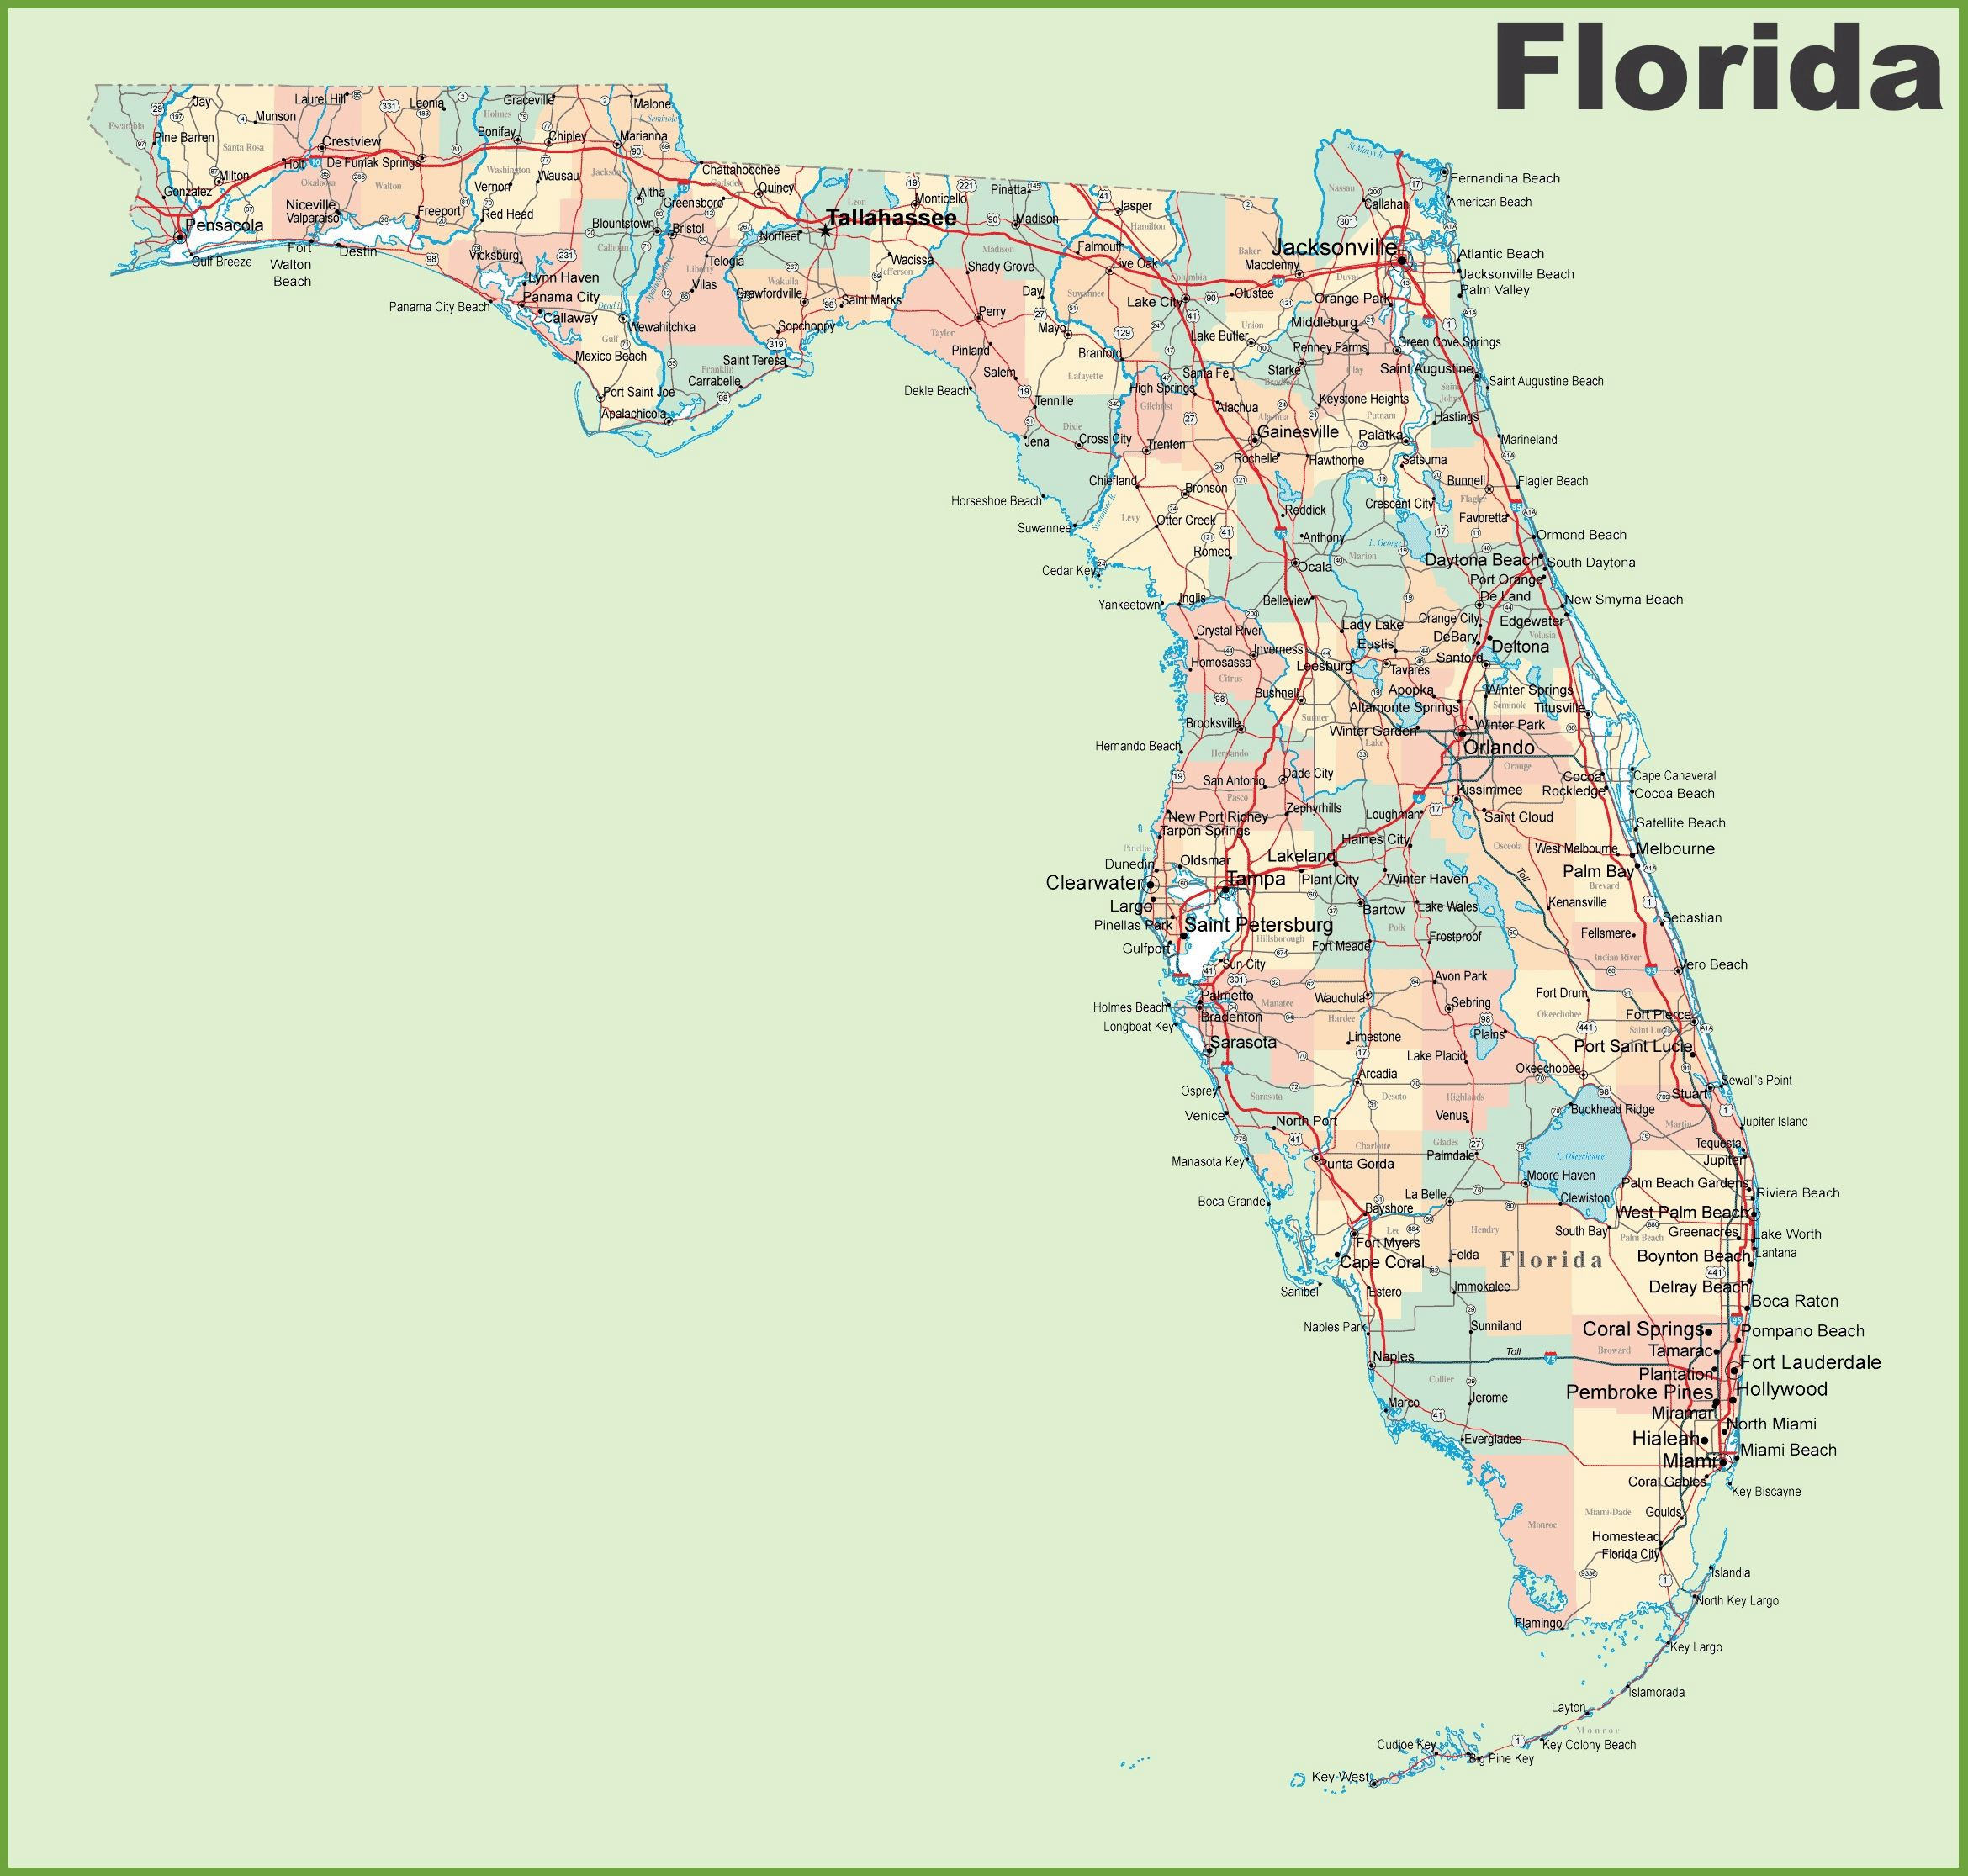 Large Florida Maps For Free Download And Print | High-Resolution And - Road Map Of Lake County Florida